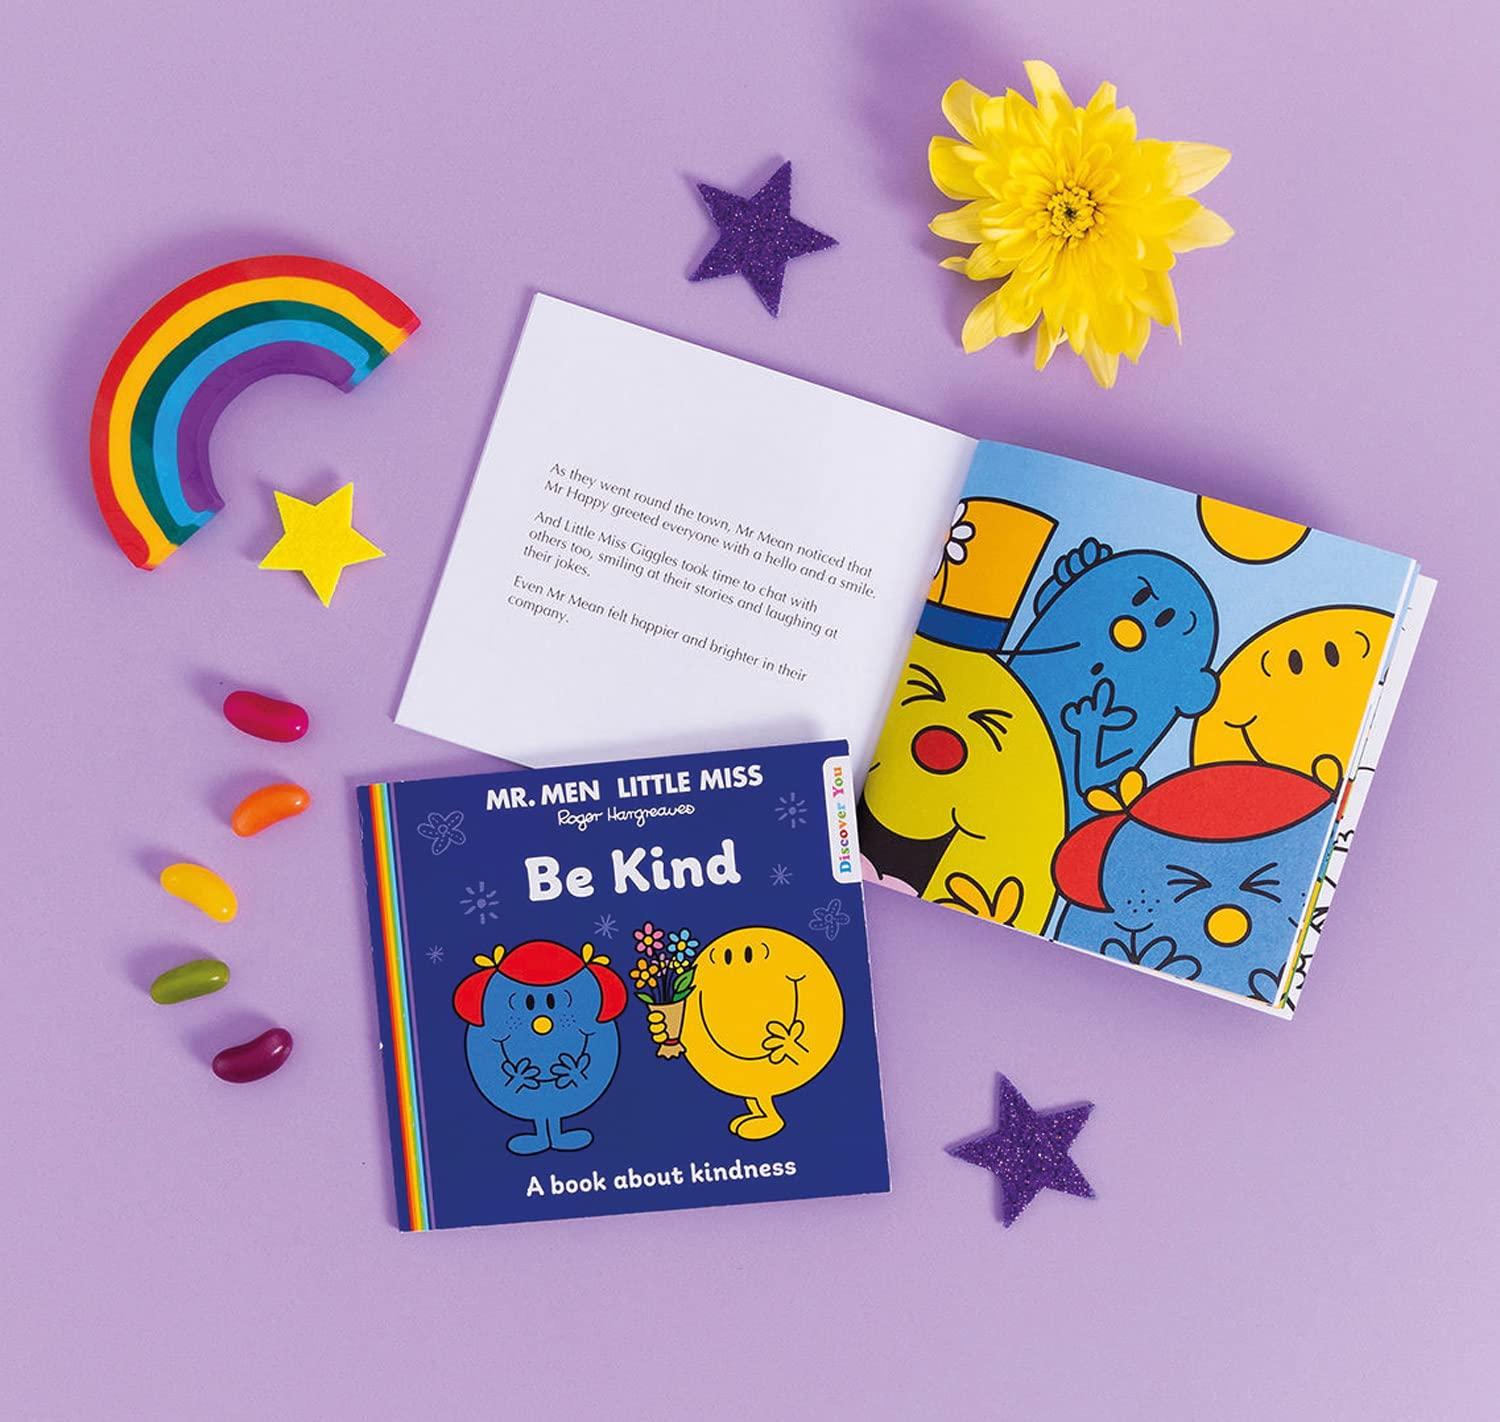 Truyện đọc thiếu nhi  tiếng Anh: Mr. Men and Little Miss Discover You — MR. MEN LITTLE MISS: BE KIND